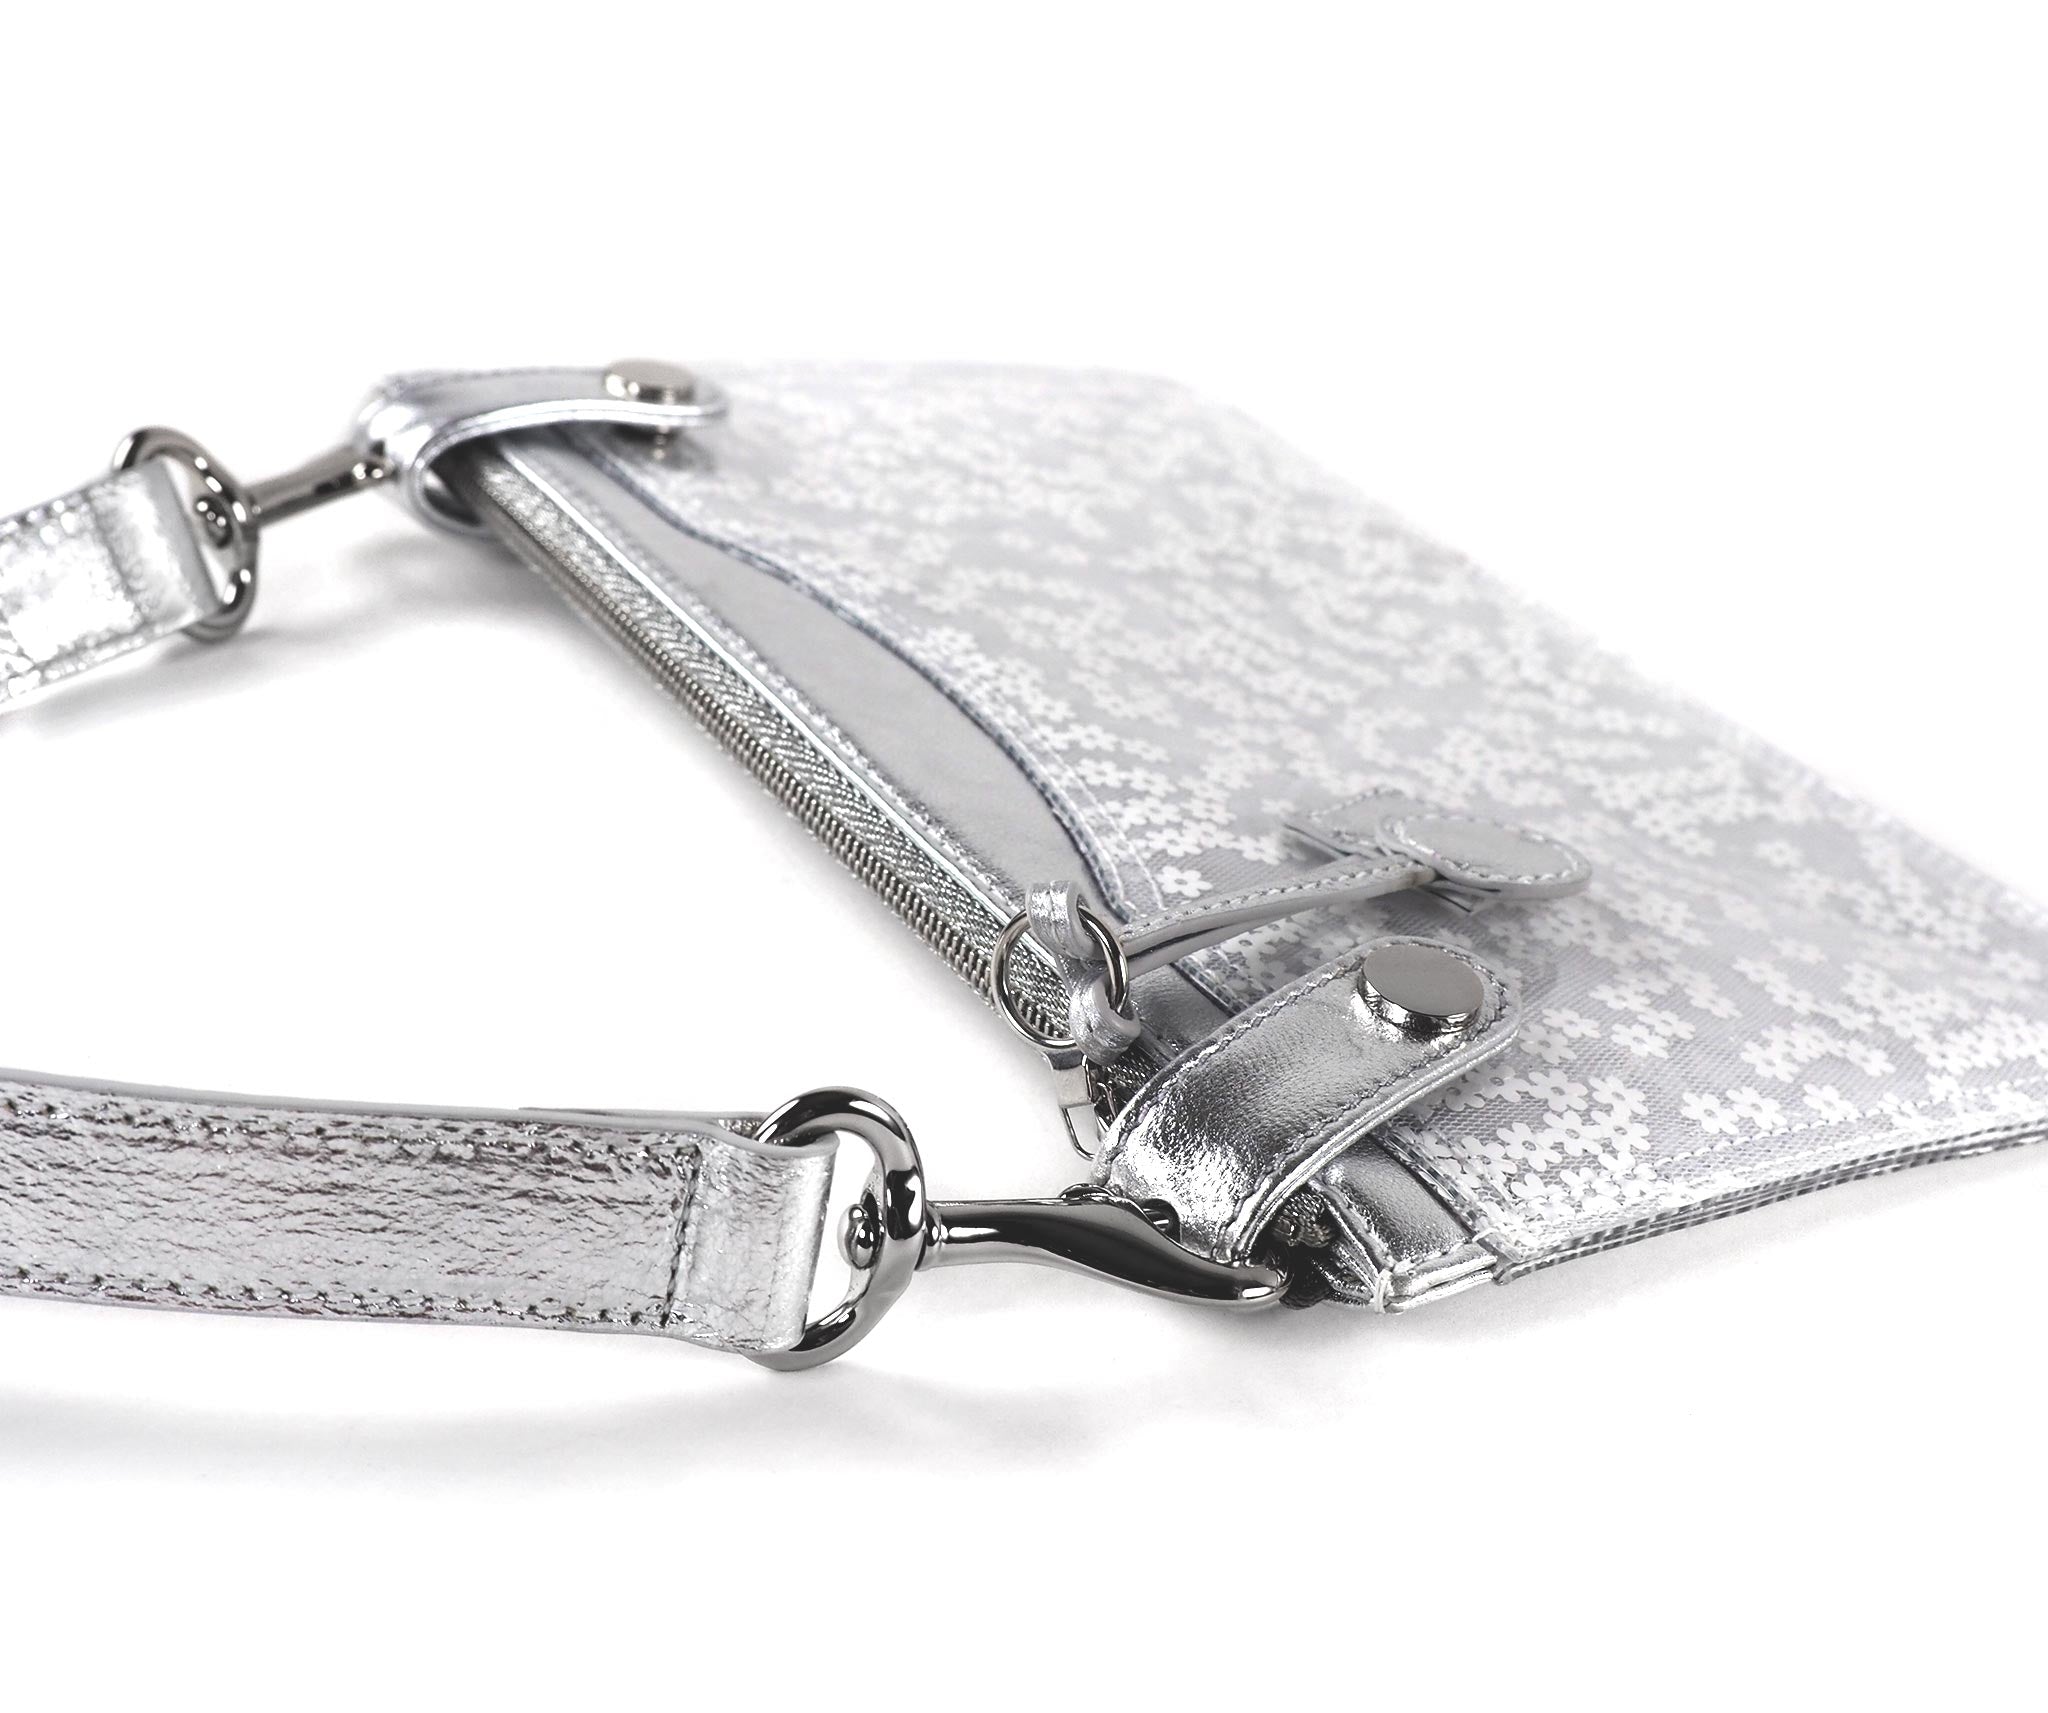 Long Strap in Silver Metallic Leather – OM NYC